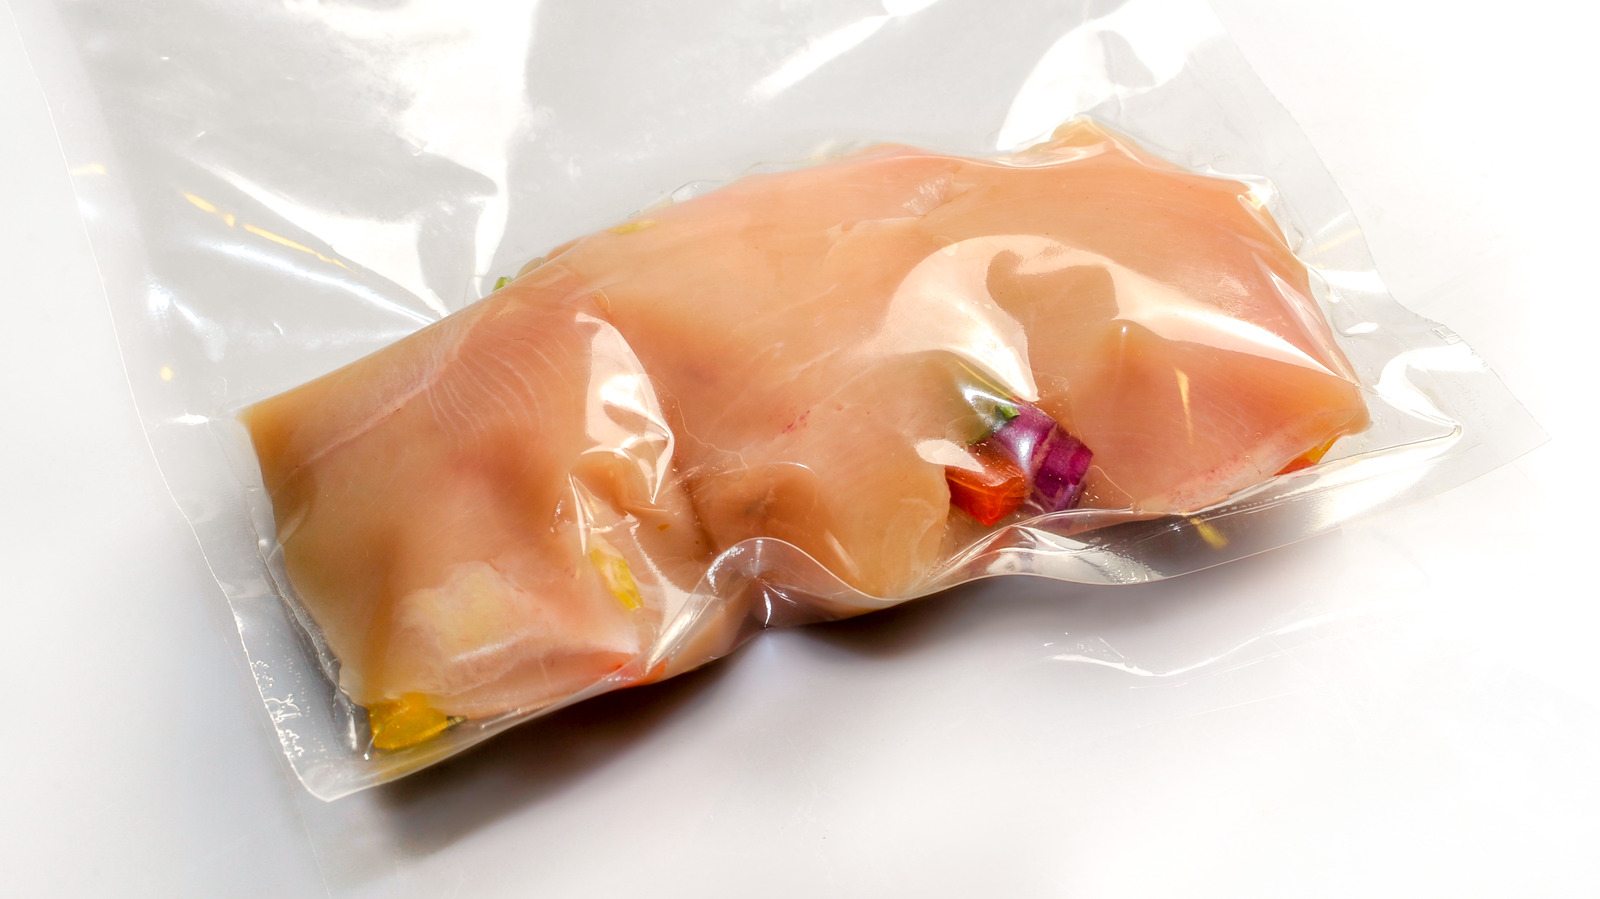 https://www.mashed.com/img/gallery/is-it-safe-to-sous-vide-chicken/l-intro-1625759785.jpg